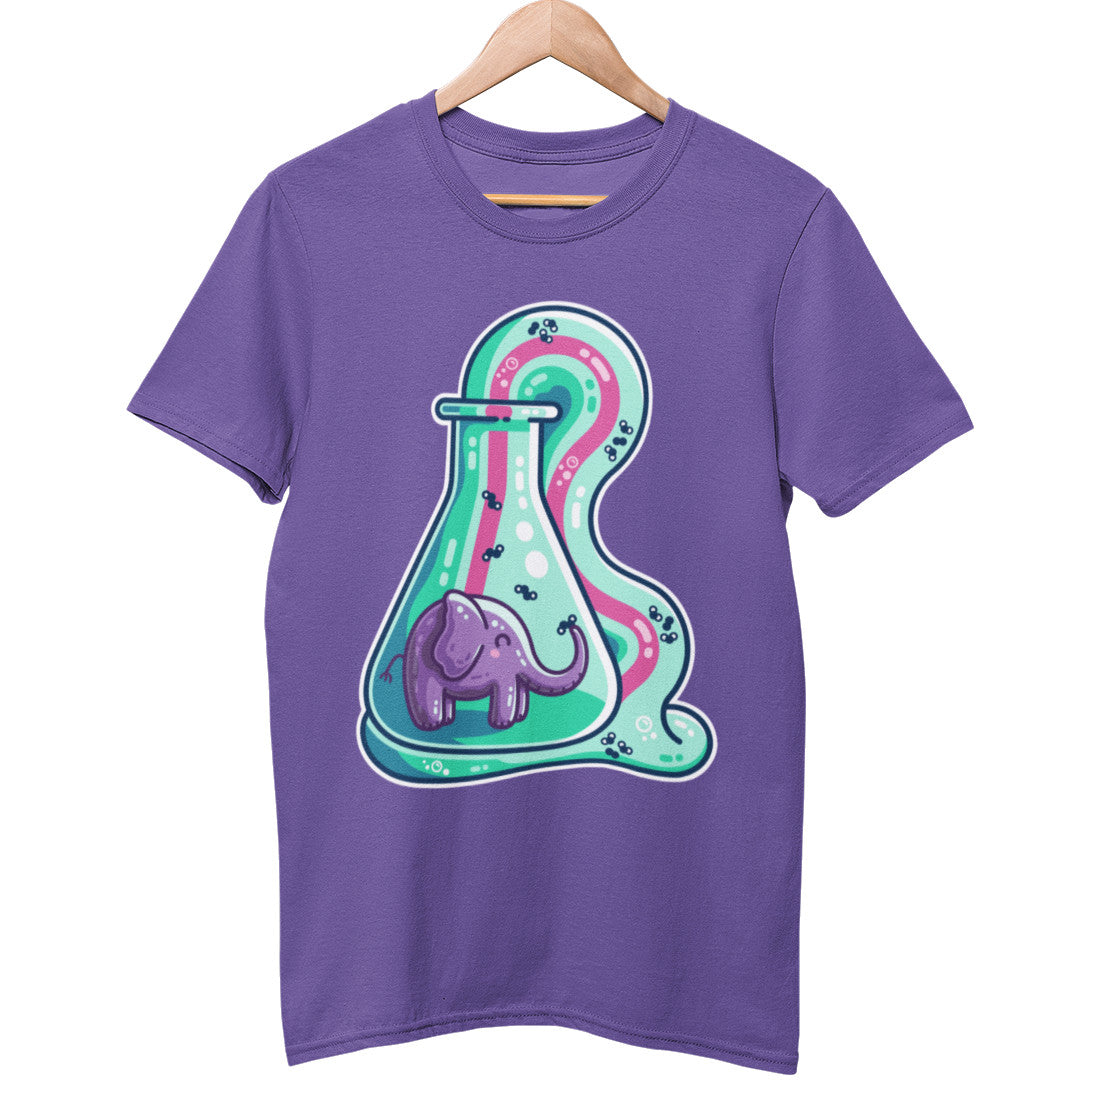 A purple coloured t-shirt, which is a purple-ish colour, on a wooden hanger, with a large print of the elephant toothpaste design on the front chest area.